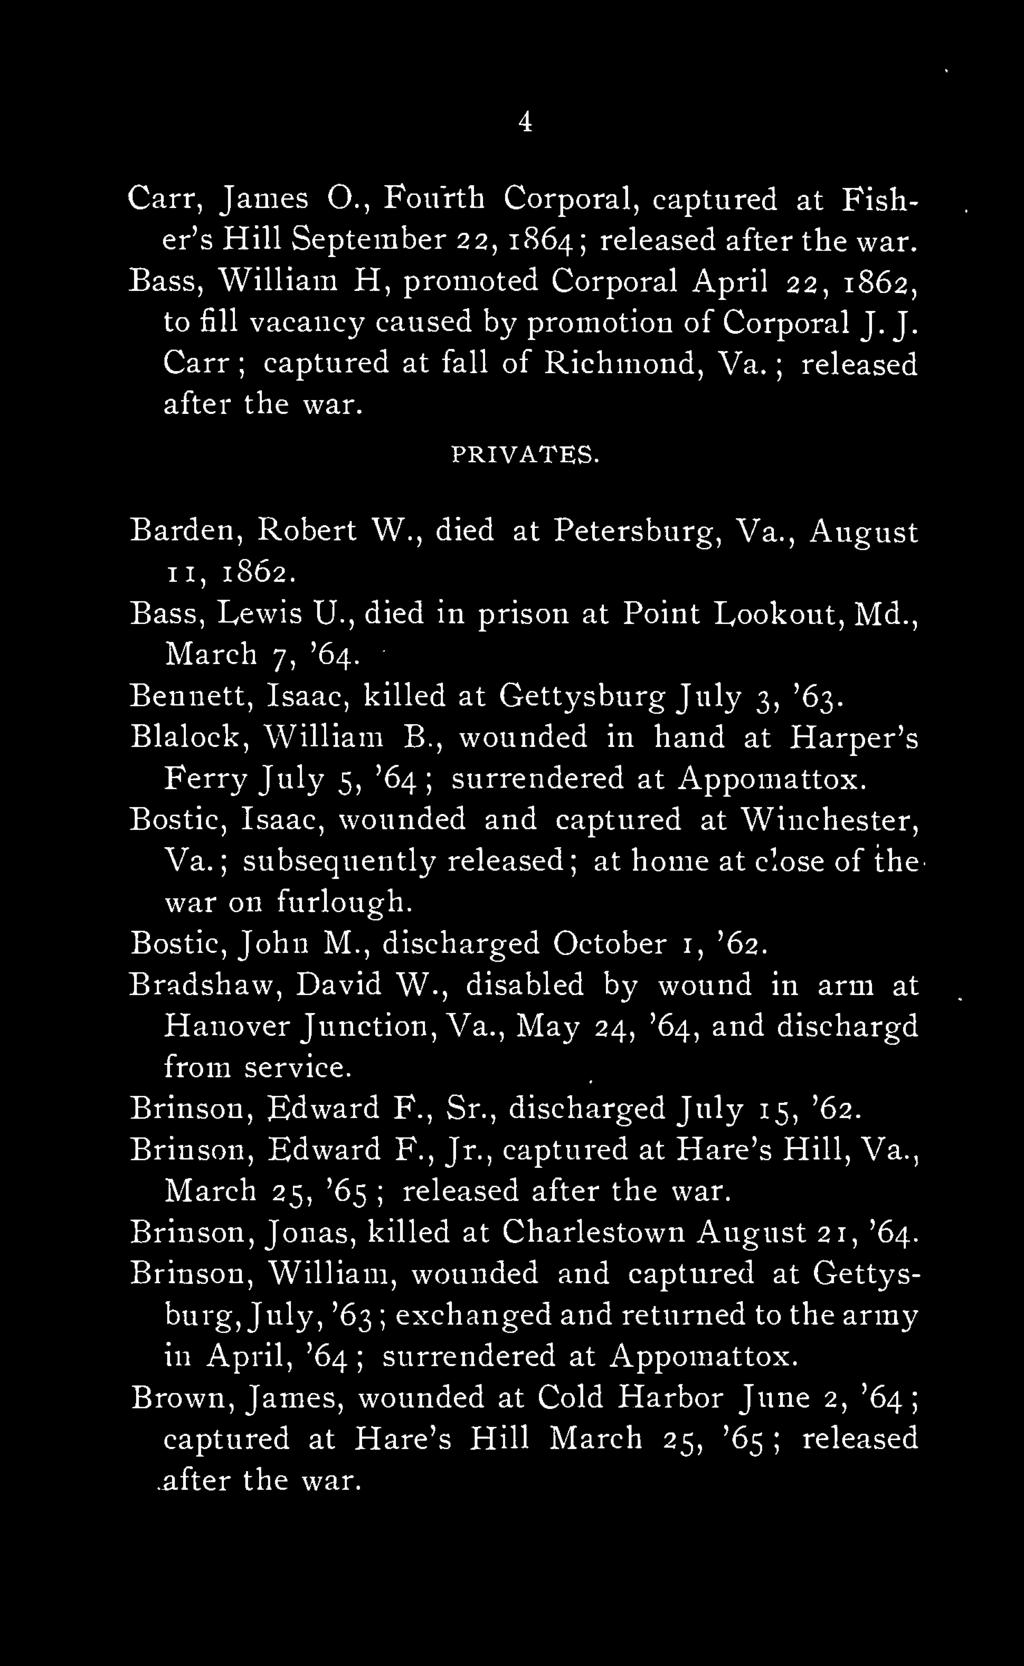 Bennett, Isaac, killed at Gettysburg July 3, '63. Blalock, William B., wounded in hand at Harper's Ferry July 5, '64 surrendered at Appomattox. Bostic, Isaac, wounded and captured at Winchester, Va.